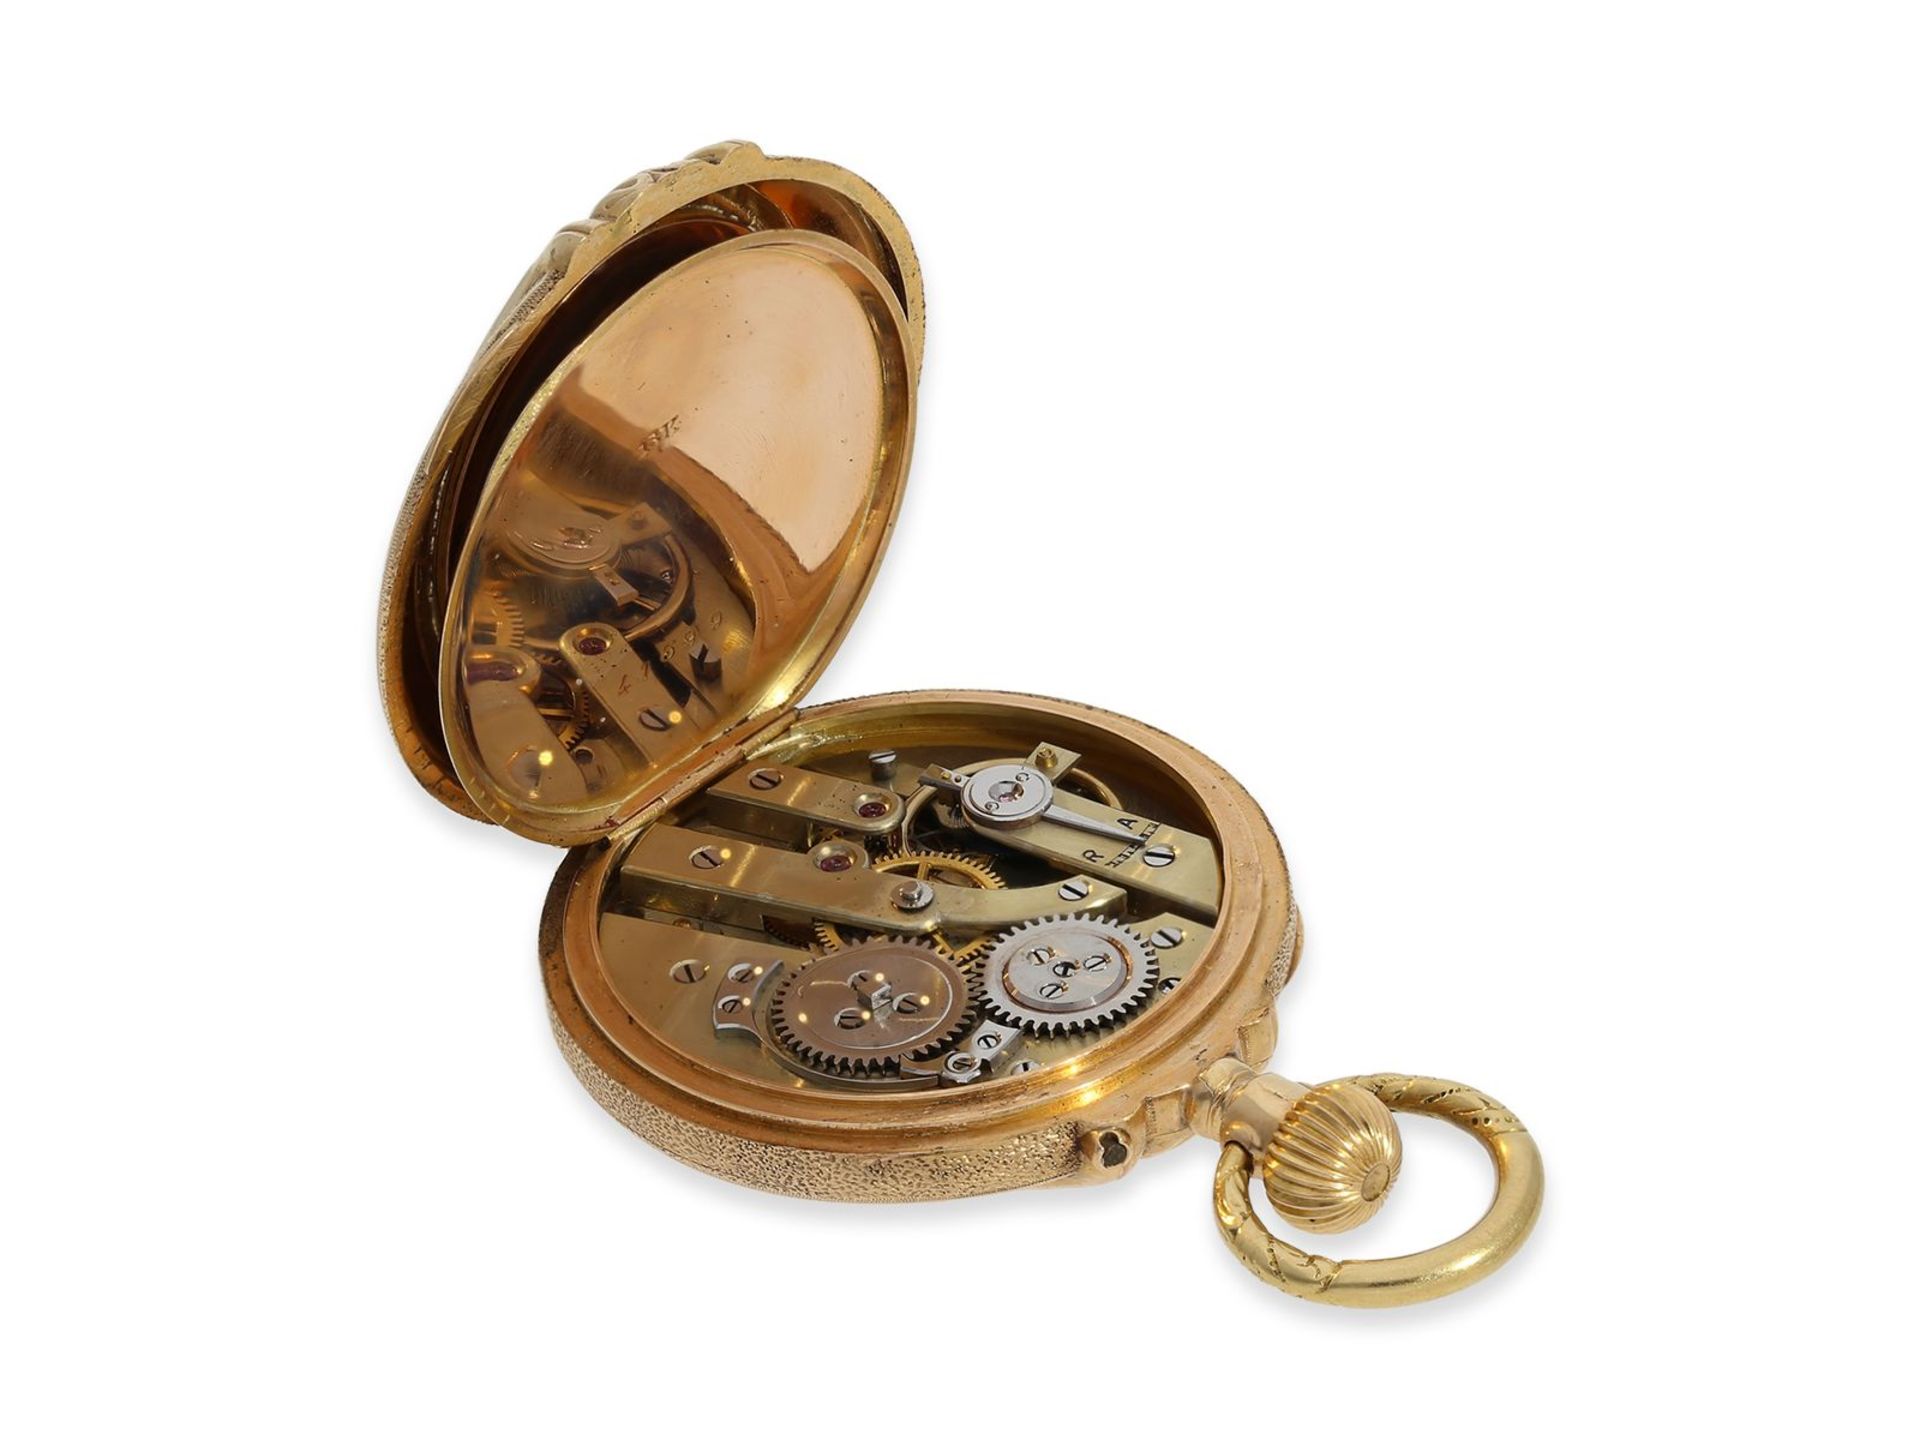 Pocket watch/ form watch: rare gold/ enamel form watch with diamonds, ca. 1880 - Image 3 of 4